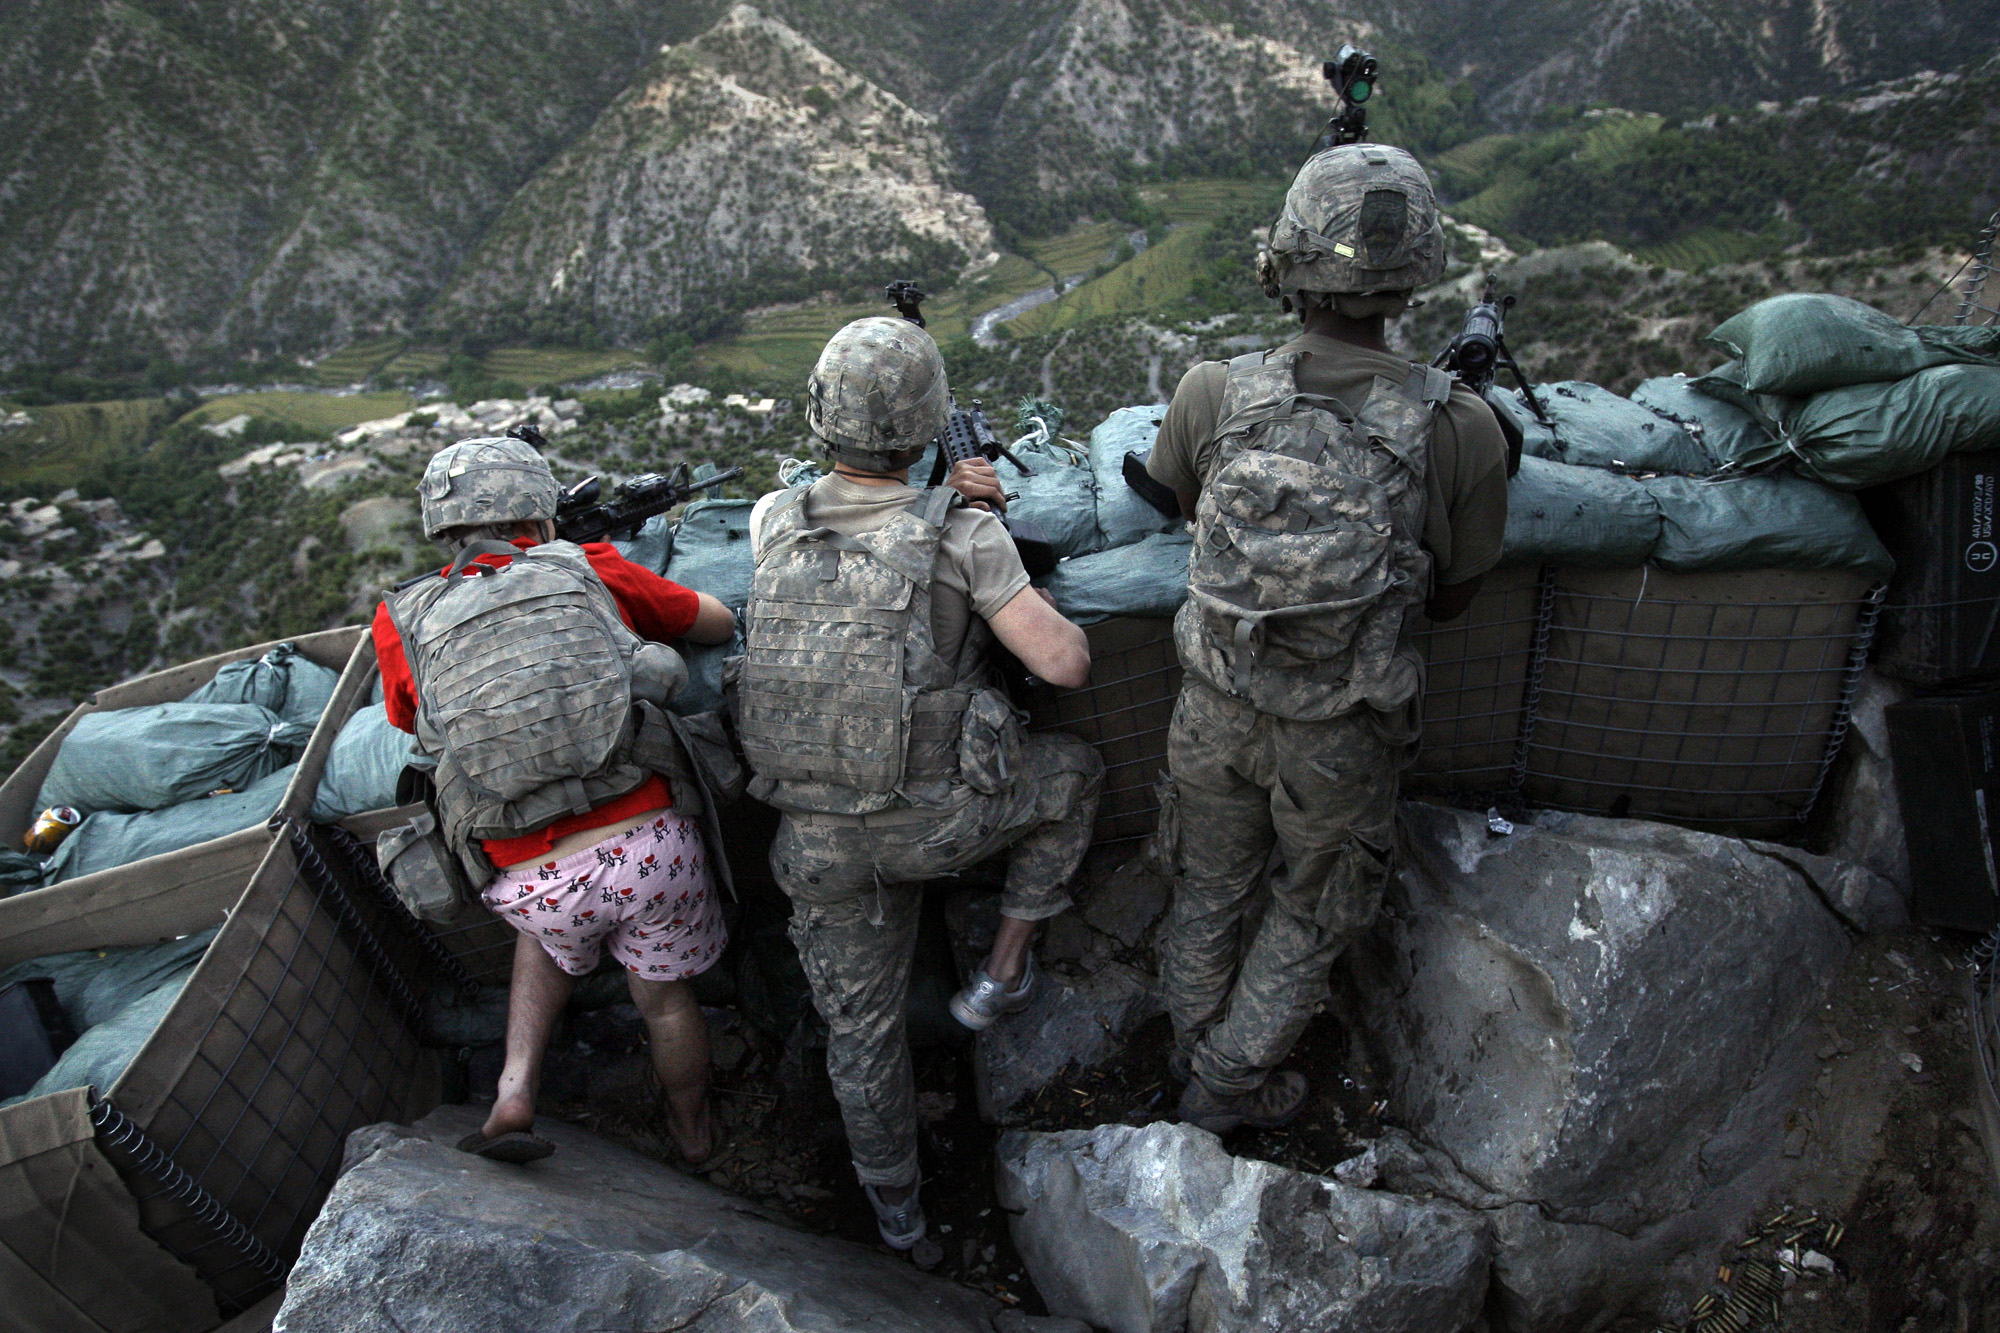 Soldiers from the U.S. Army First Battalion, 26th Infantry take defensive positions at firebase Restrepo after receiving fire from Taliban positions in the Korengal Valley of Afghanistan's Kunar Province on May 11, 2009.